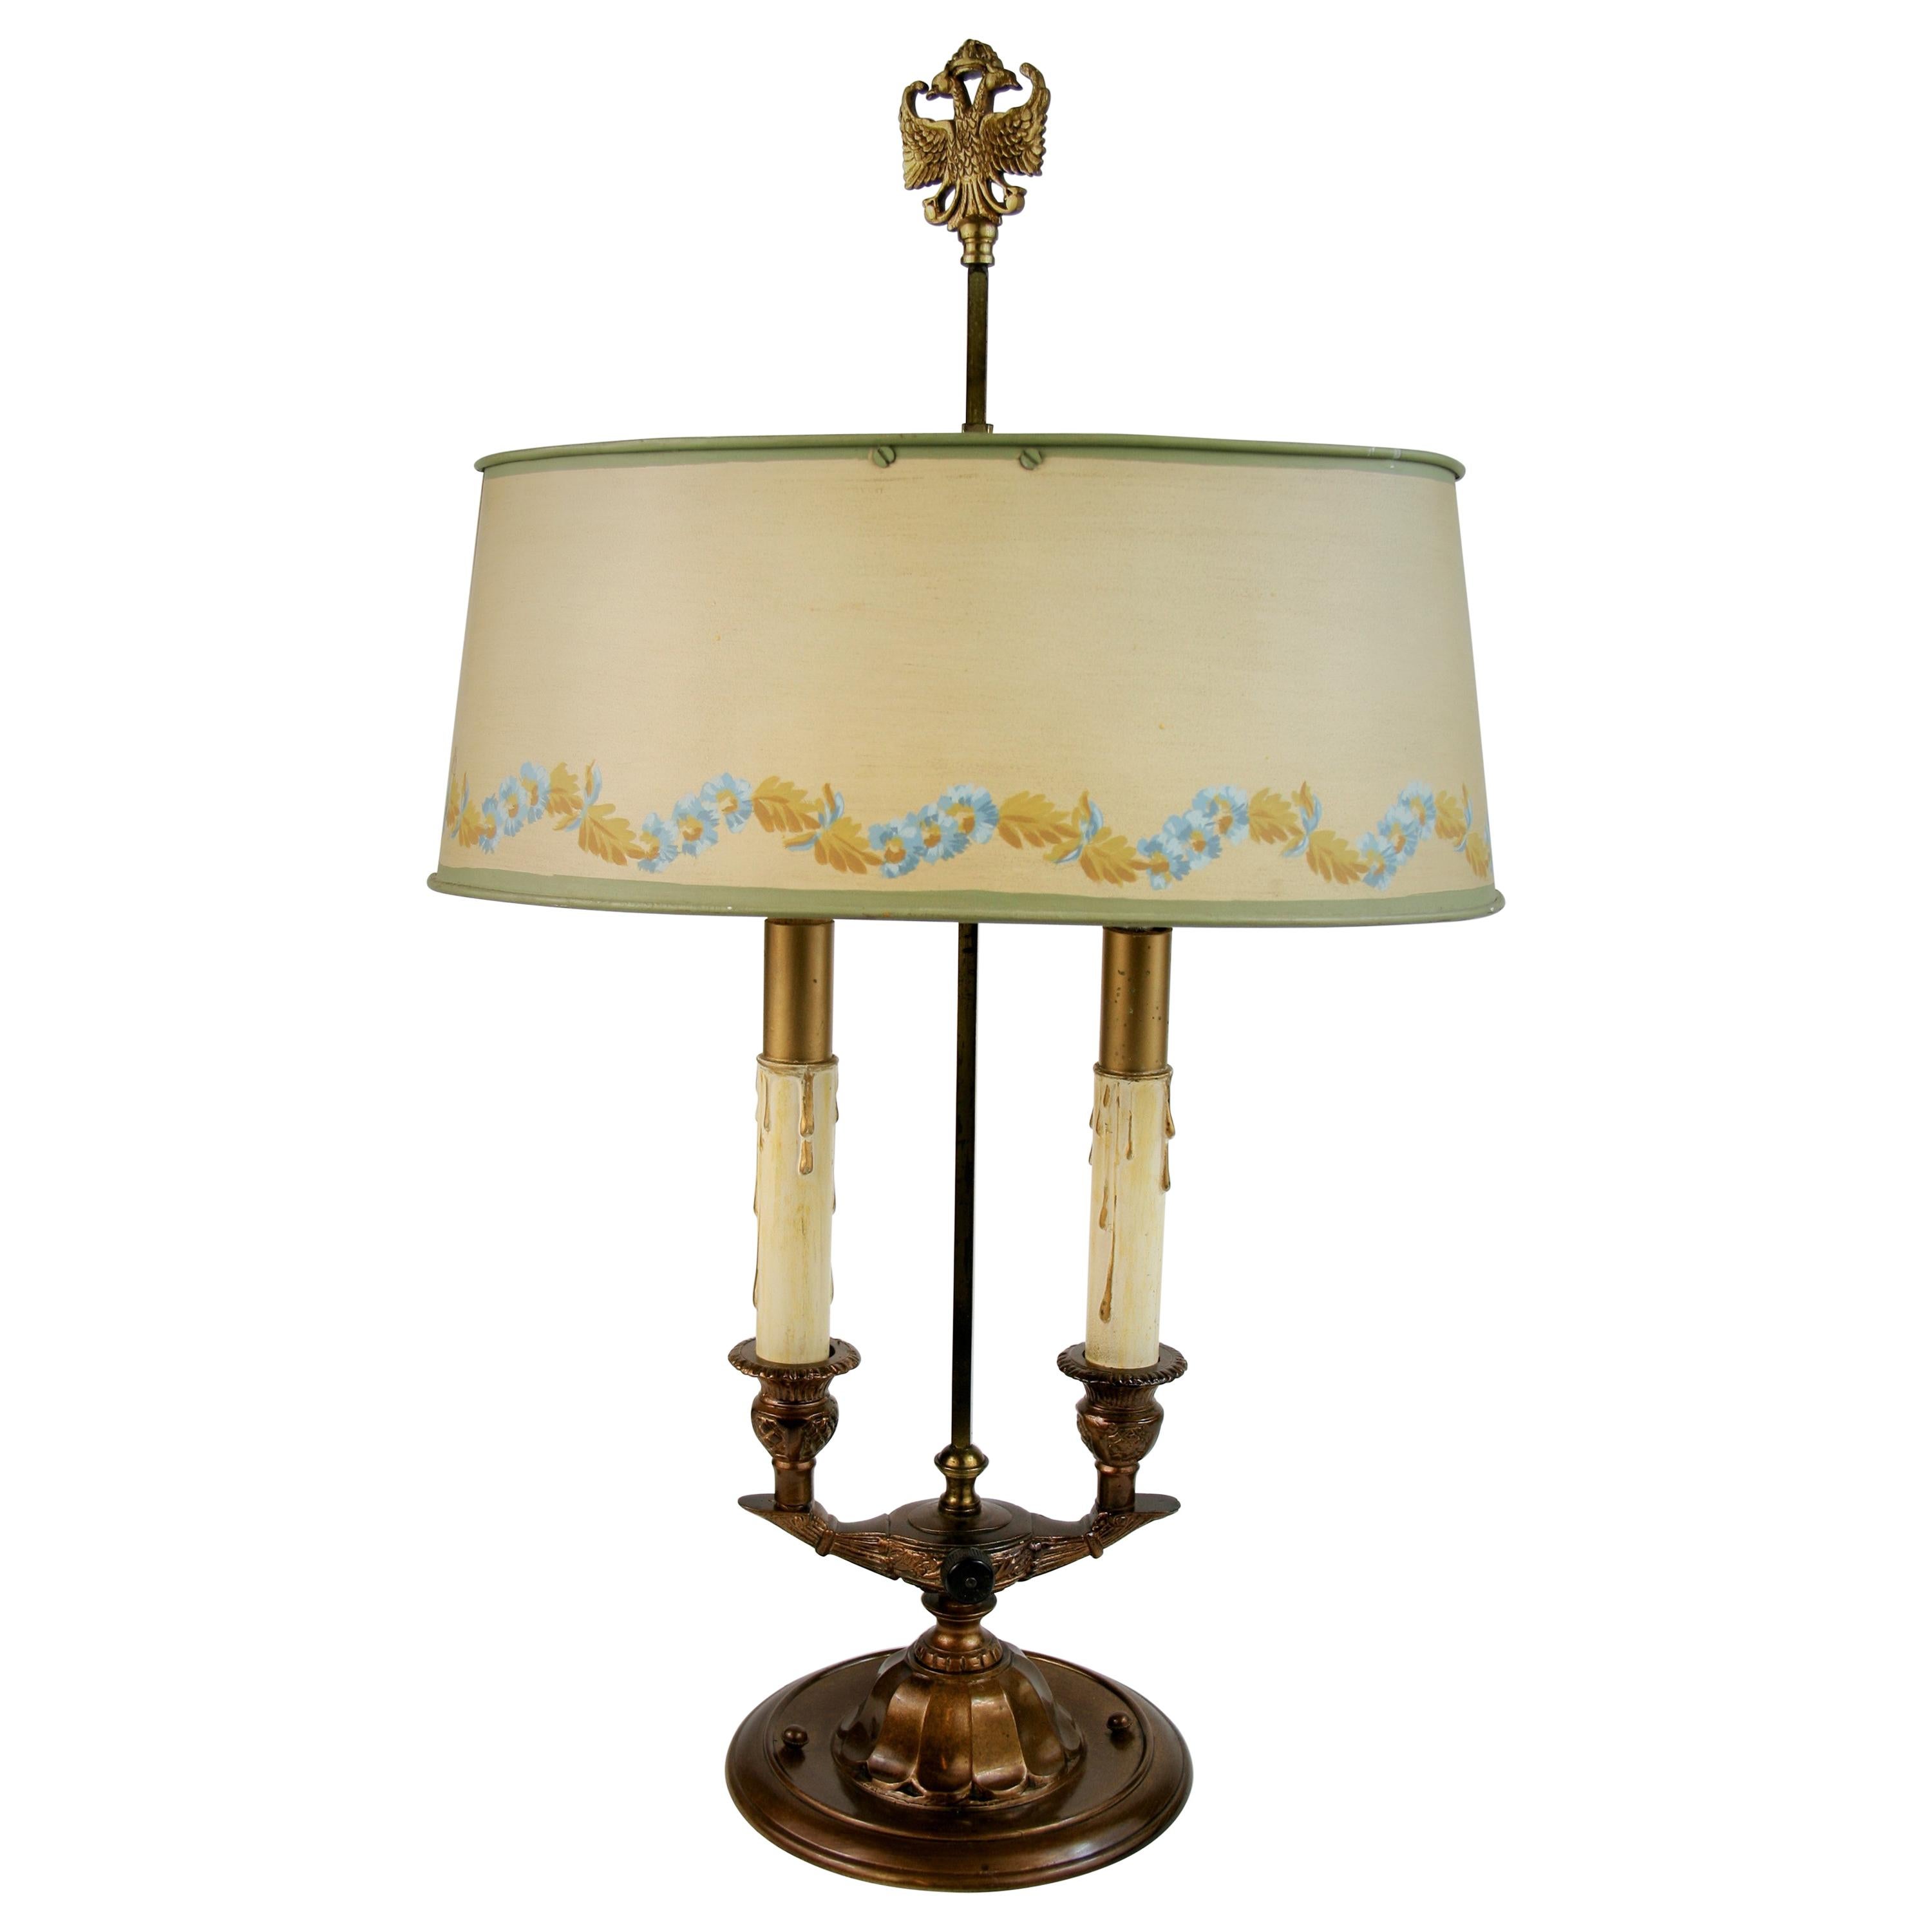 Bouillotte Table Lamp with Decorative Metal Shade